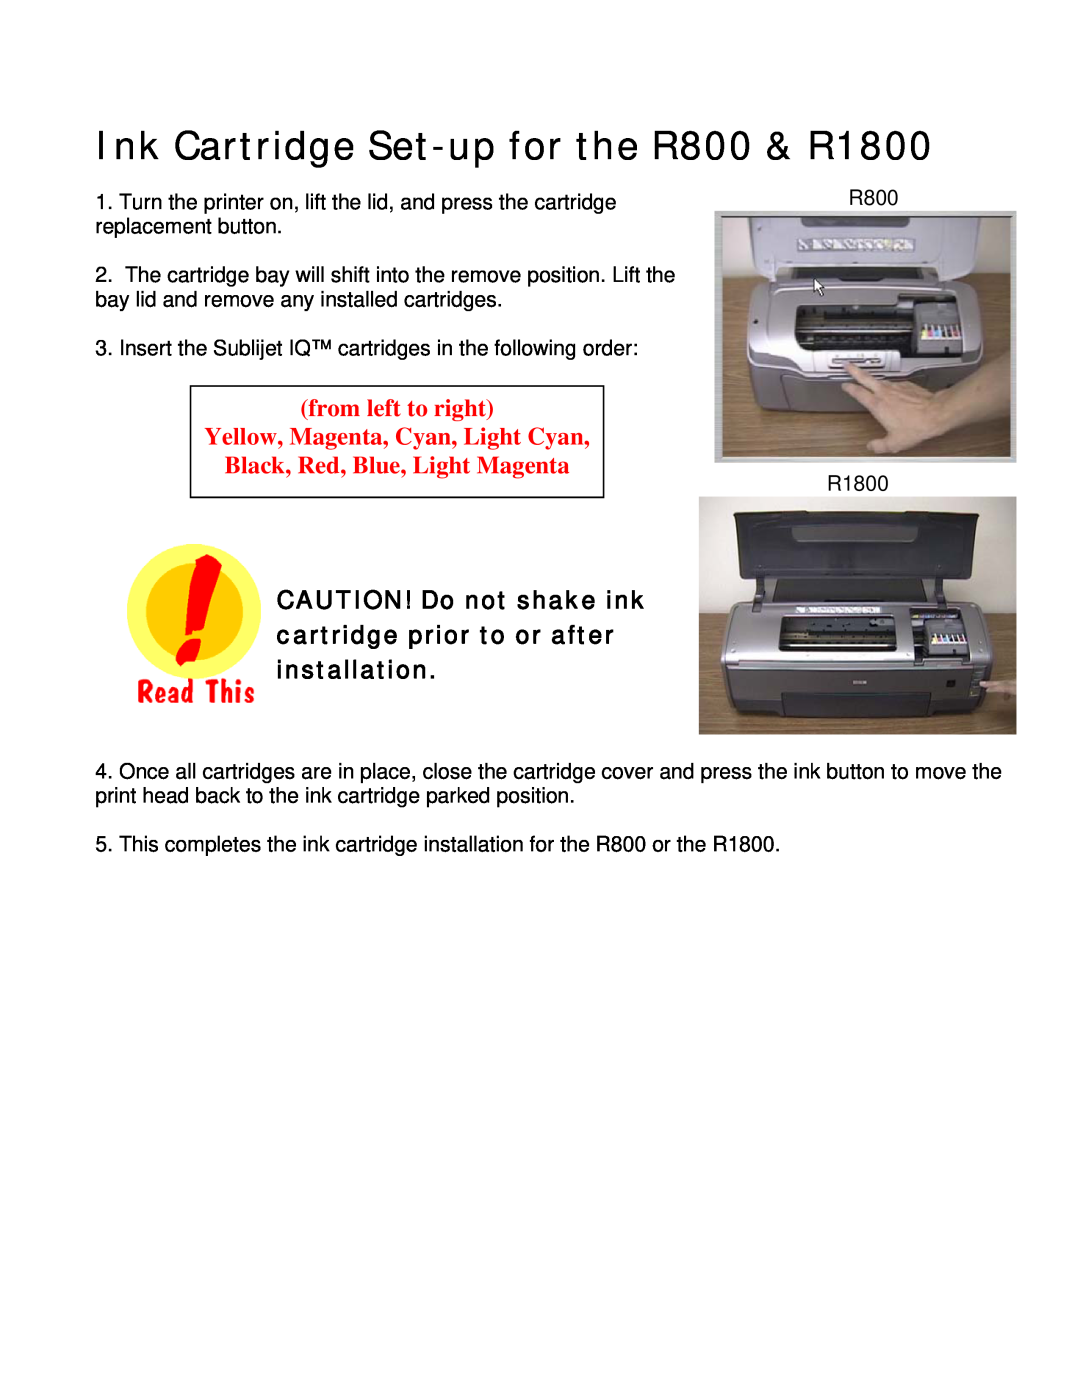 Epson Ink Cartridge Set-up for the R800 & R1800, CAUTION! Do not shake ink cartridge prior to or after installation 